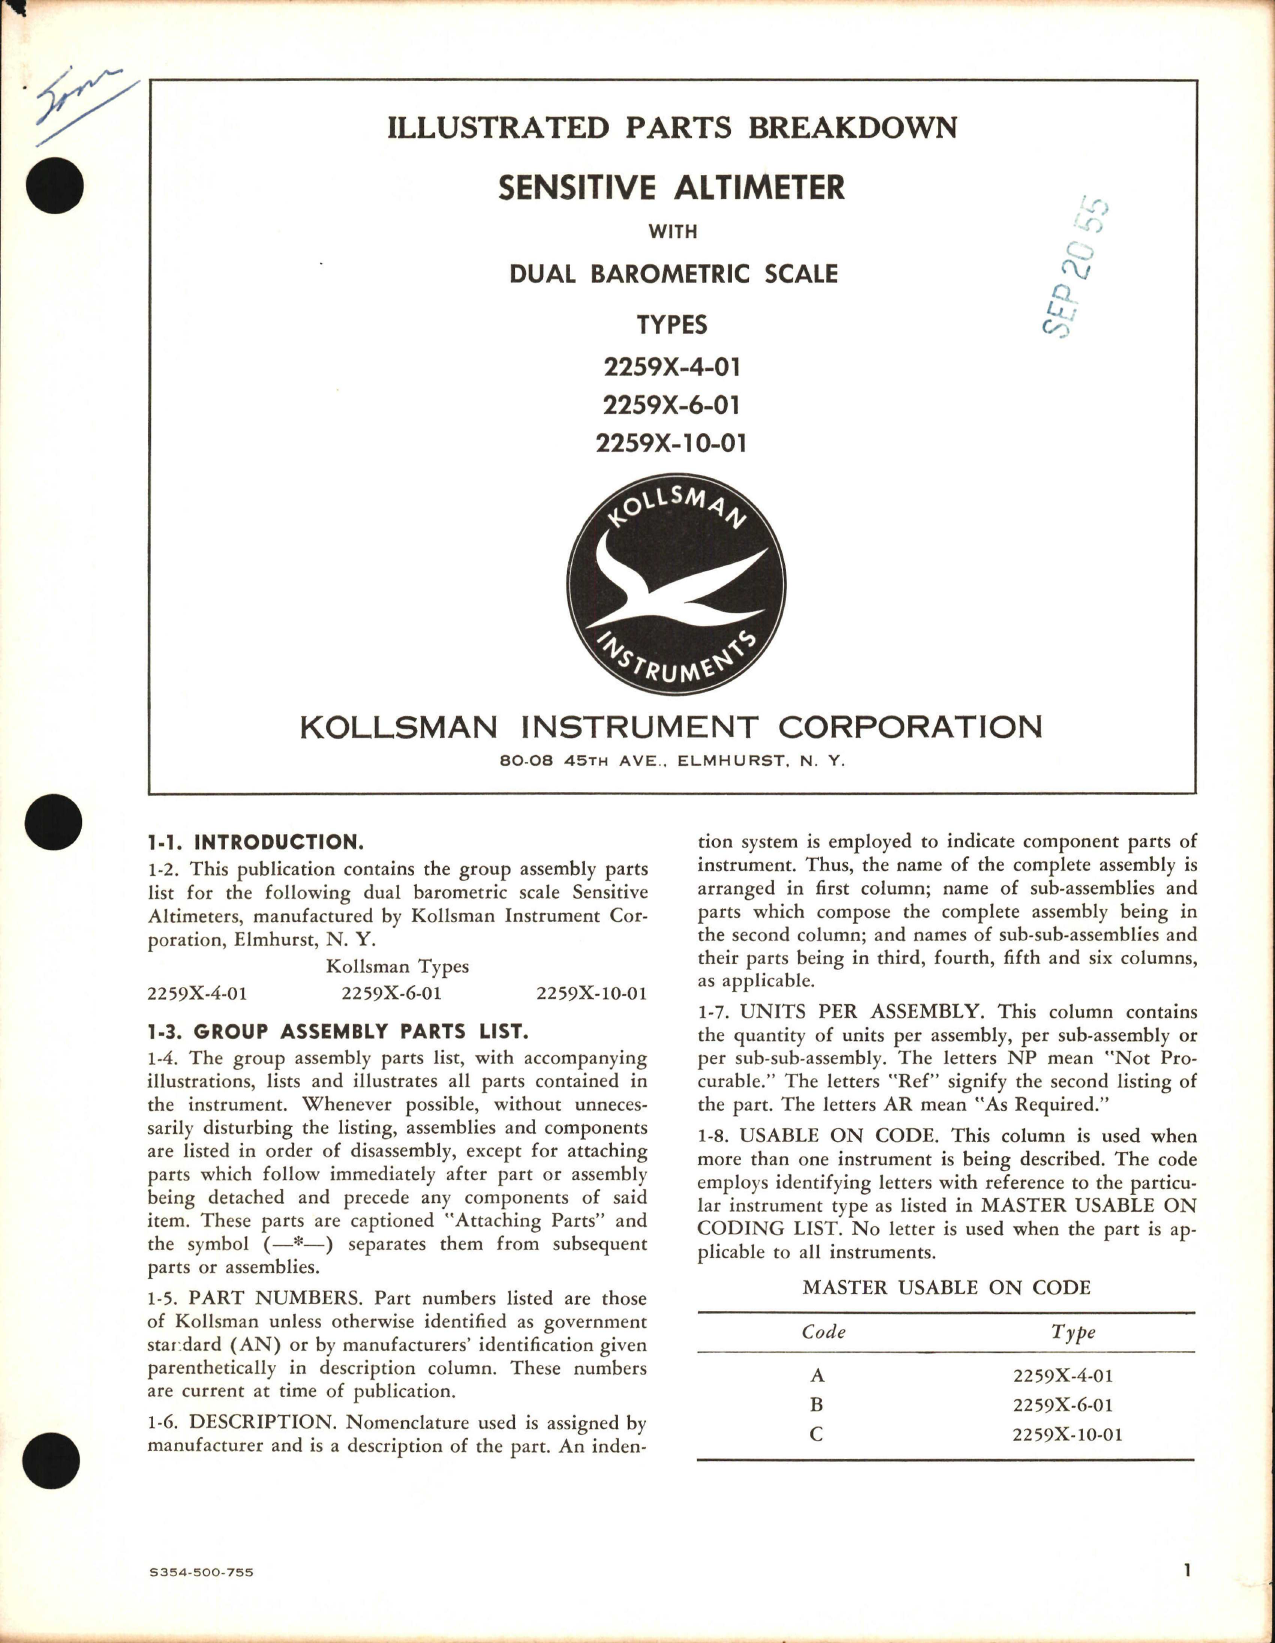 Sample page 1 from AirCorps Library document: Illustrated Parts Breakdown for Kollsman Sensitive Altimeter with Dual Barometric Scale